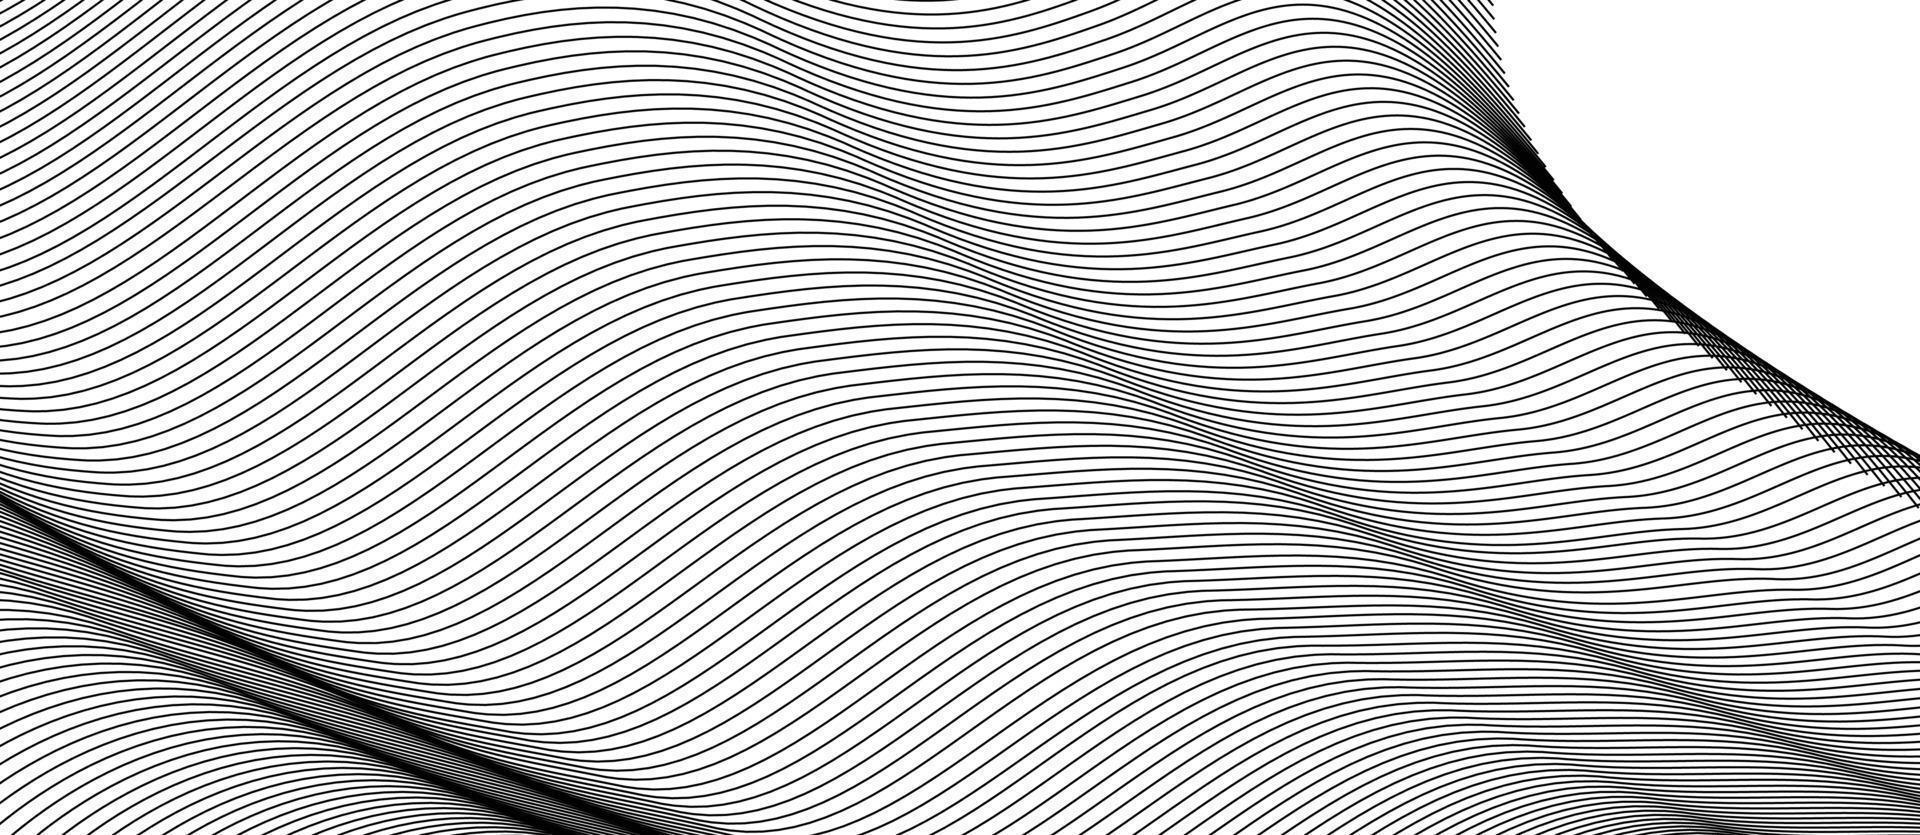 lines wave abstract stripe design. Curvy White Surfaces. Modern Abstract Background. Digital frequency track equalizer. Stylized line art background vector